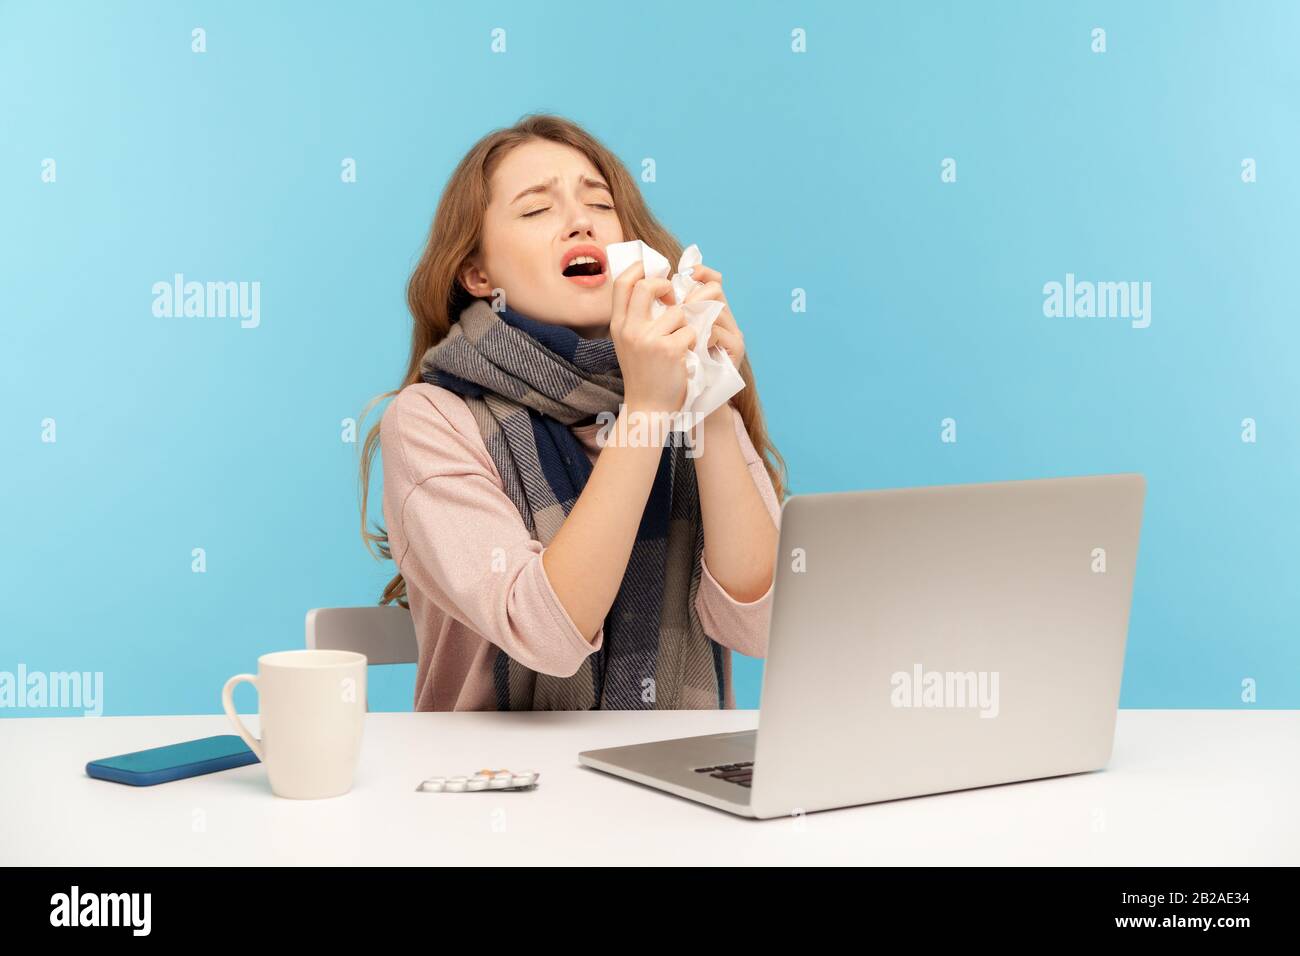 Flu-sick girl sneezing in tissue, ill freelance woman coughing suffering fever, seasonal influenza symptoms while working on laptop at home office, sy Stock Photo